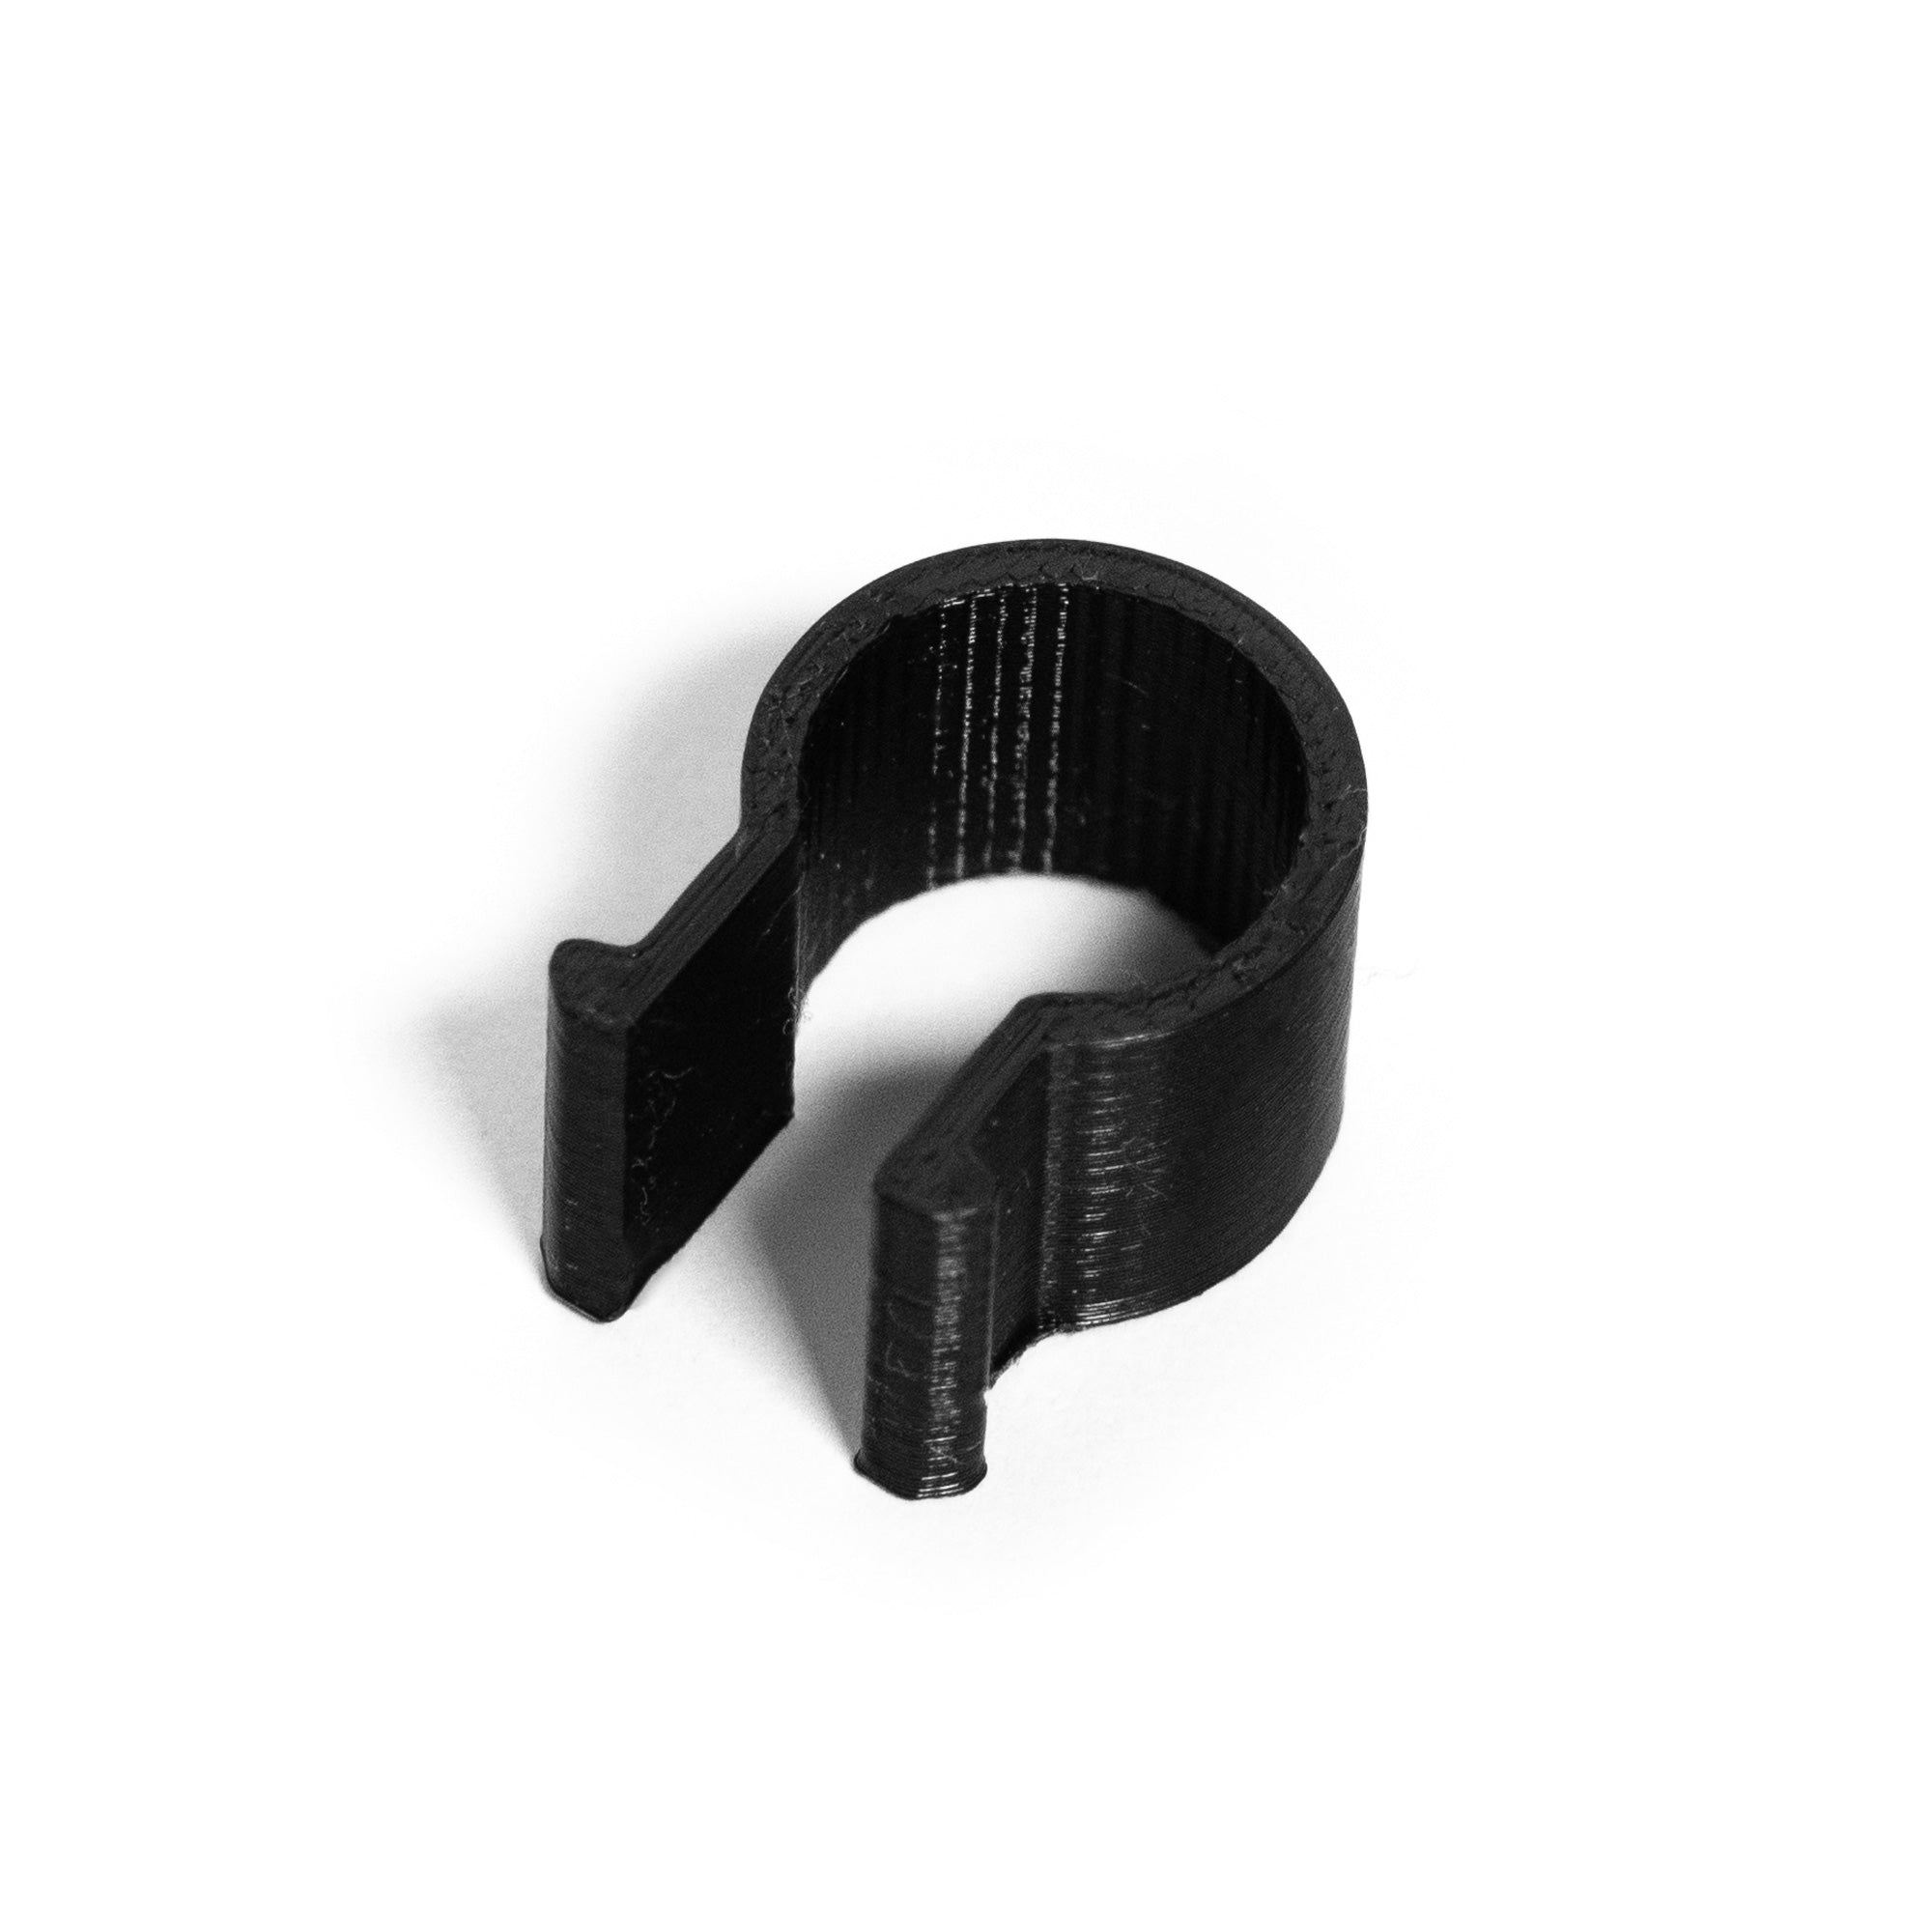 ButtKicker Cable Clips for Aluminum Extrusion Rigs